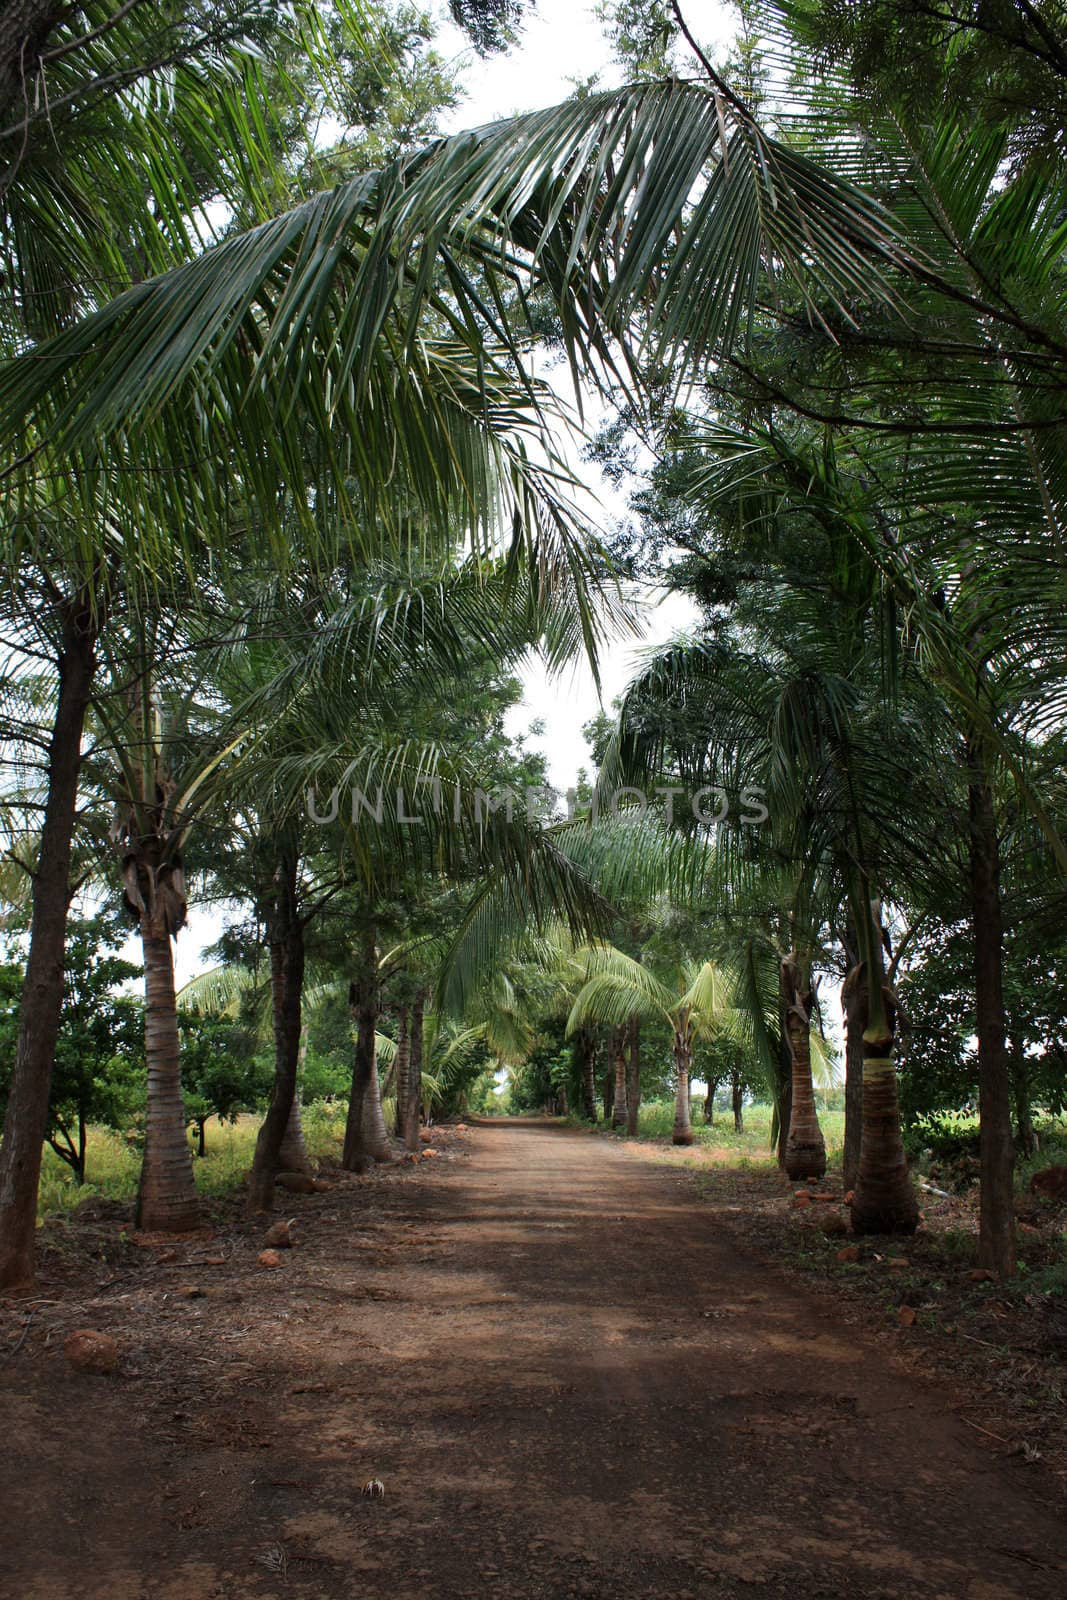 A path in rural tropical area in India passing through a line of palm trees.